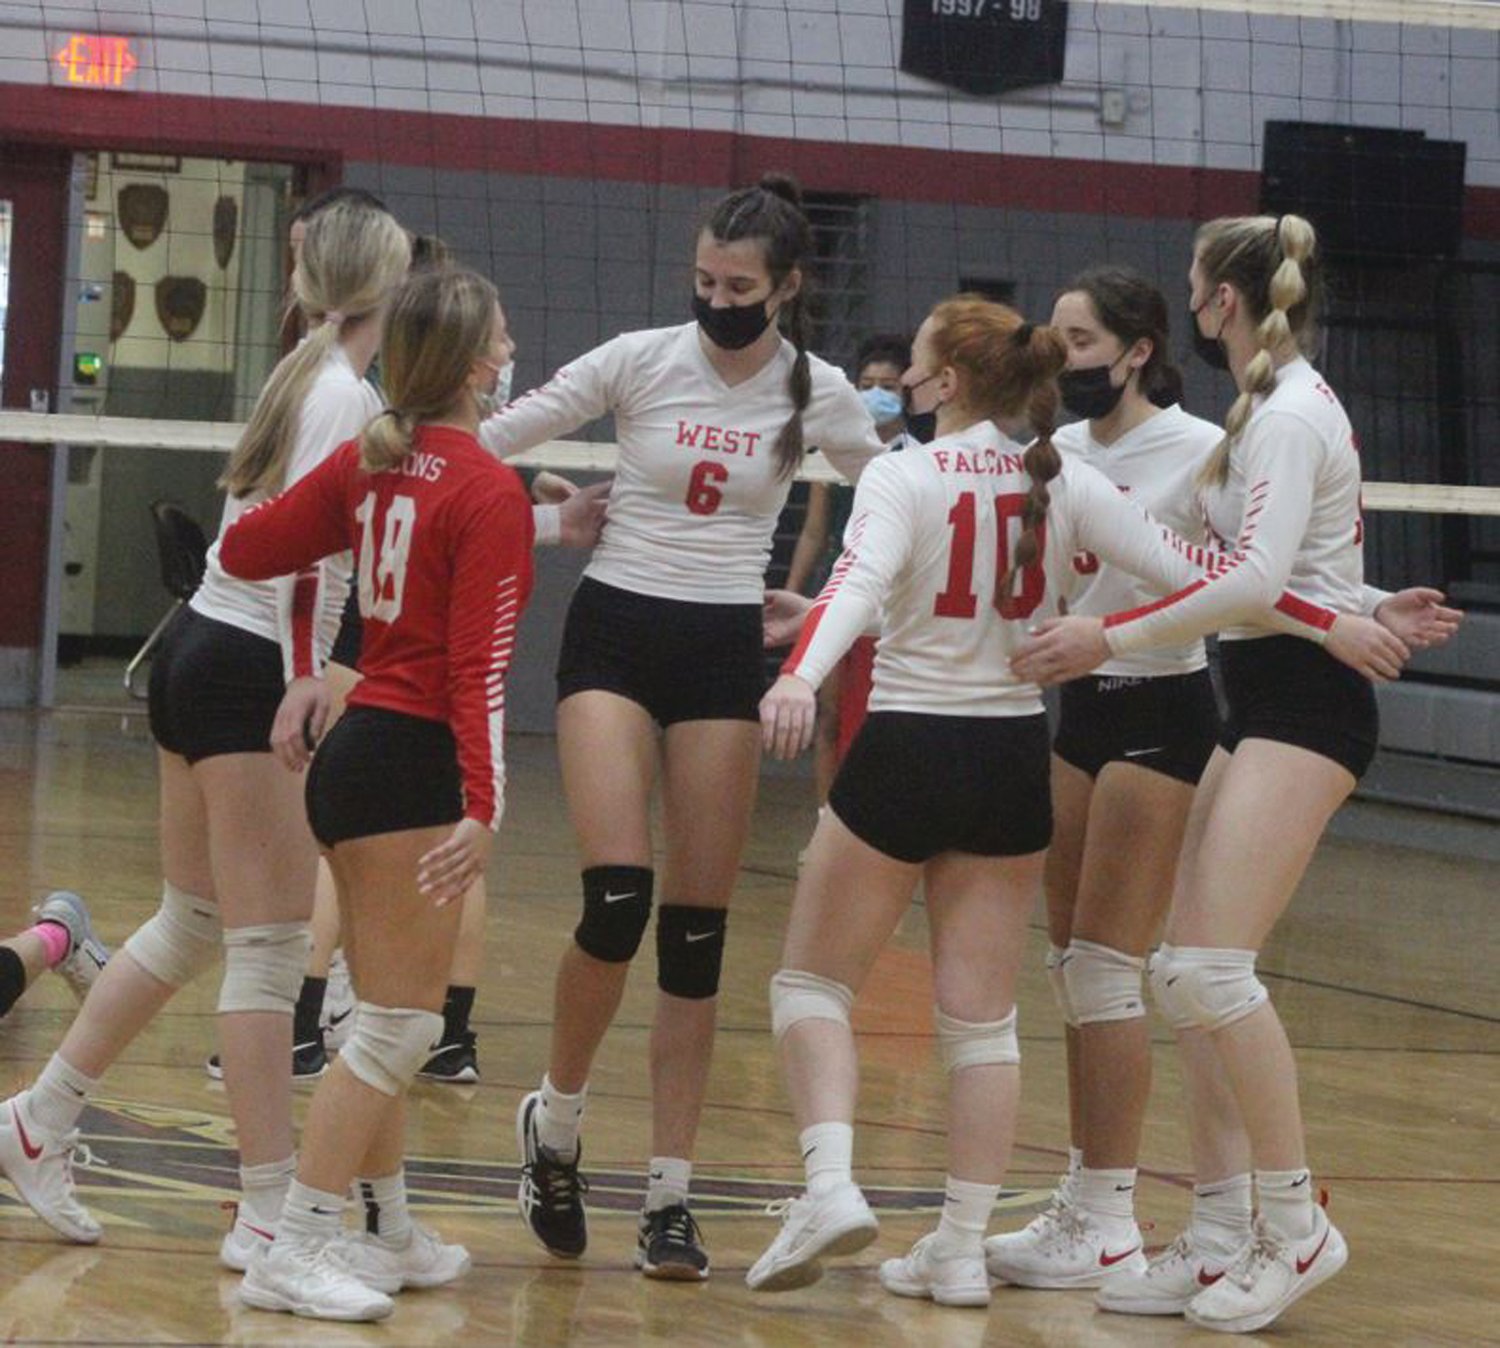 GETTING THE WIN: Members of the Cranston West girls volleyball team celebrate. (Photos by Alex Sponseller)